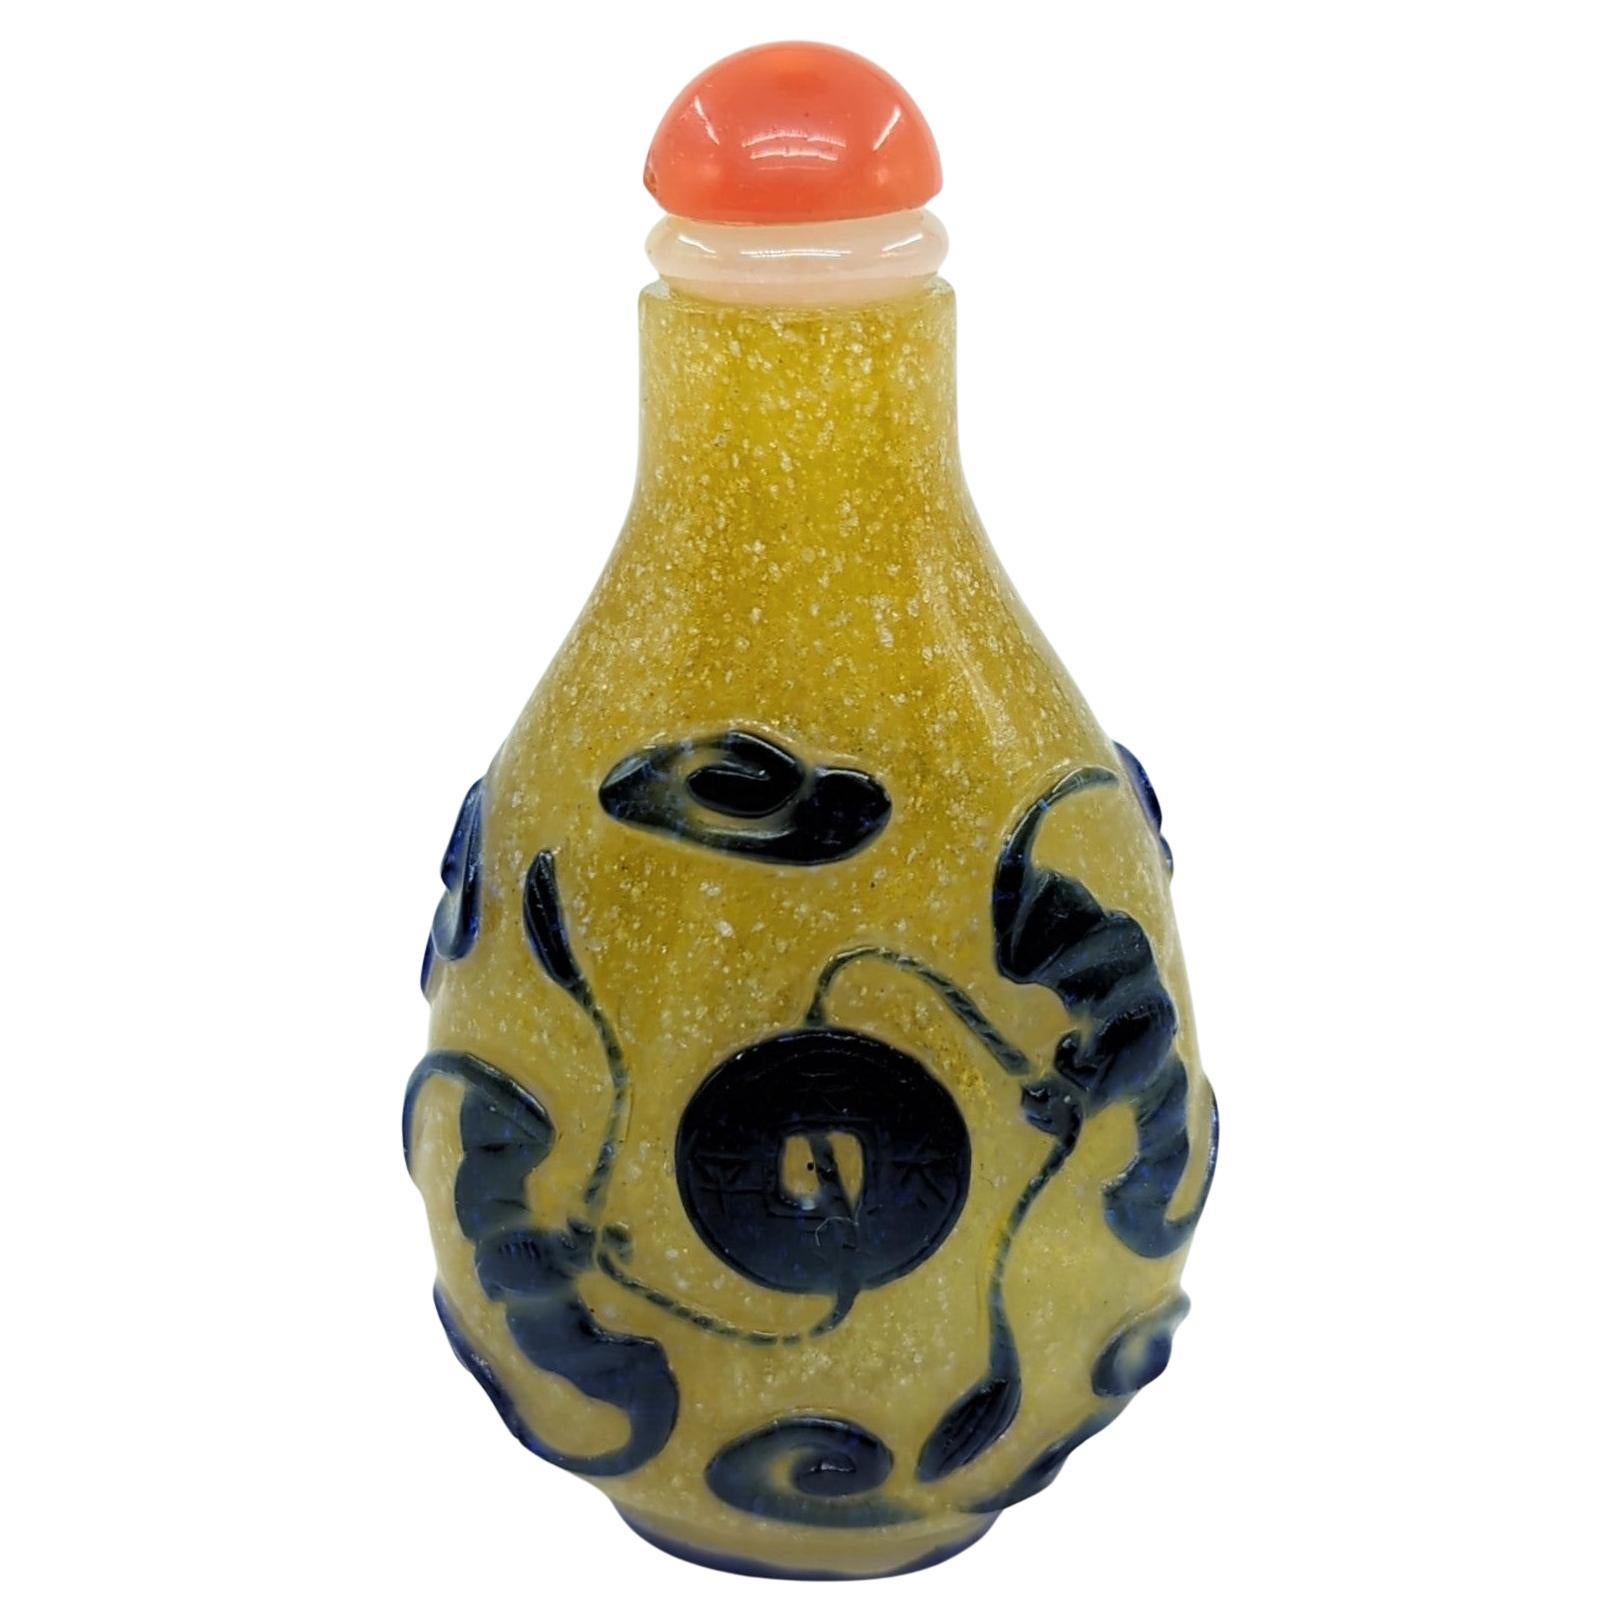 This fine Qing period antique snuff bottle is a beautiful example of color glass overlay craftsmanship. It features a vibrant yellow snow storm ground, over which dark blue glass has been overlaid to create a striking design. The central motif on